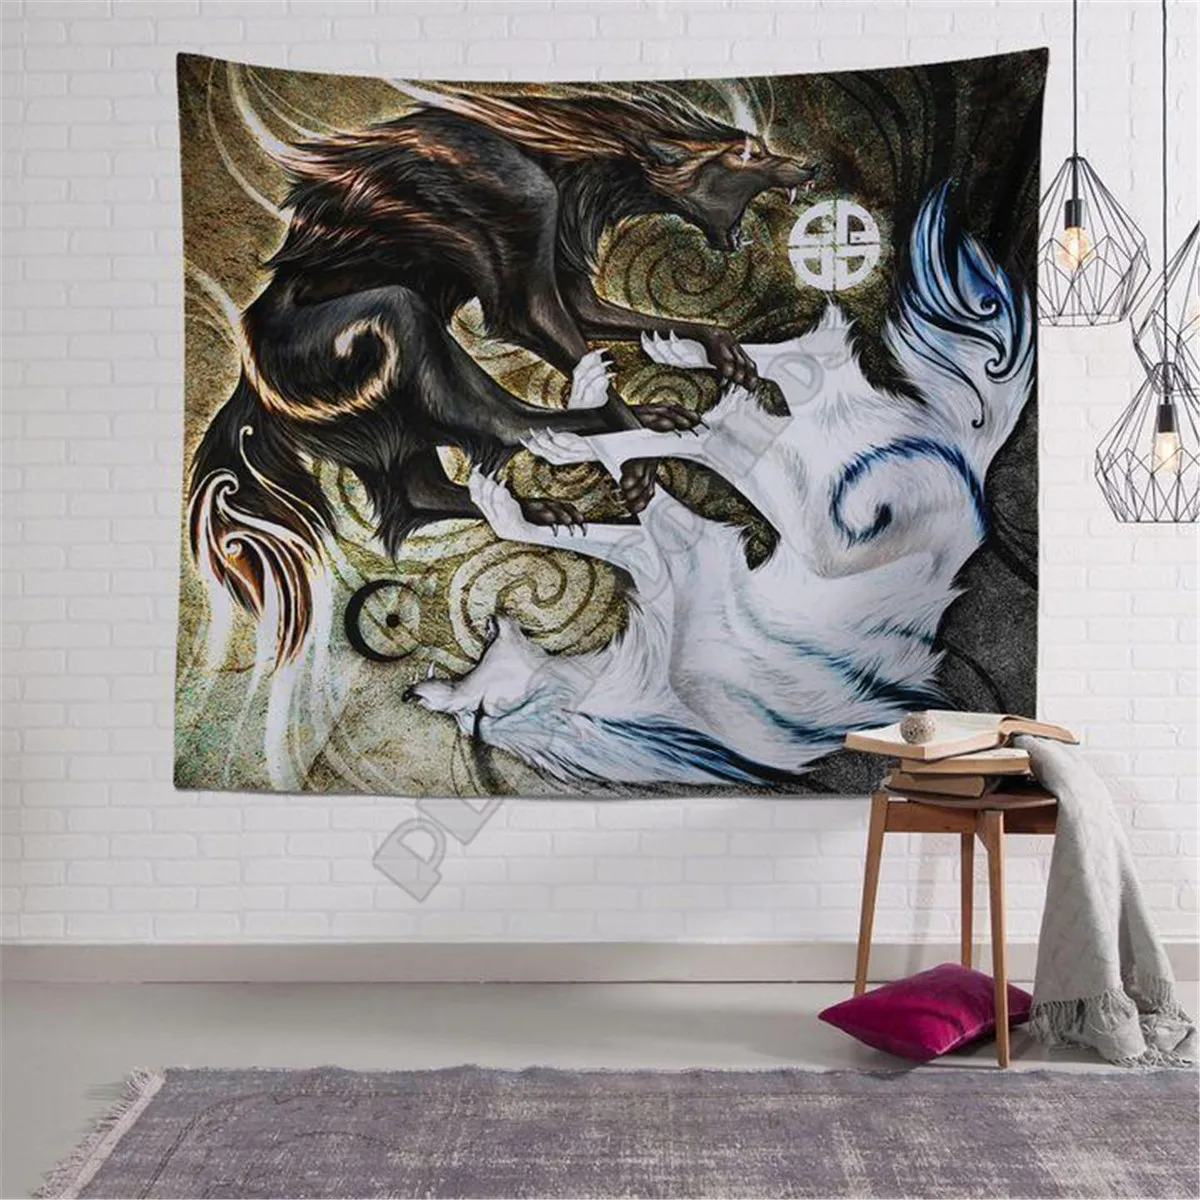 

Viking Legend Warrior Limited 3D Print Wall Tapestry Rectangular Home Decor Wall Hanging Home Decoration 04